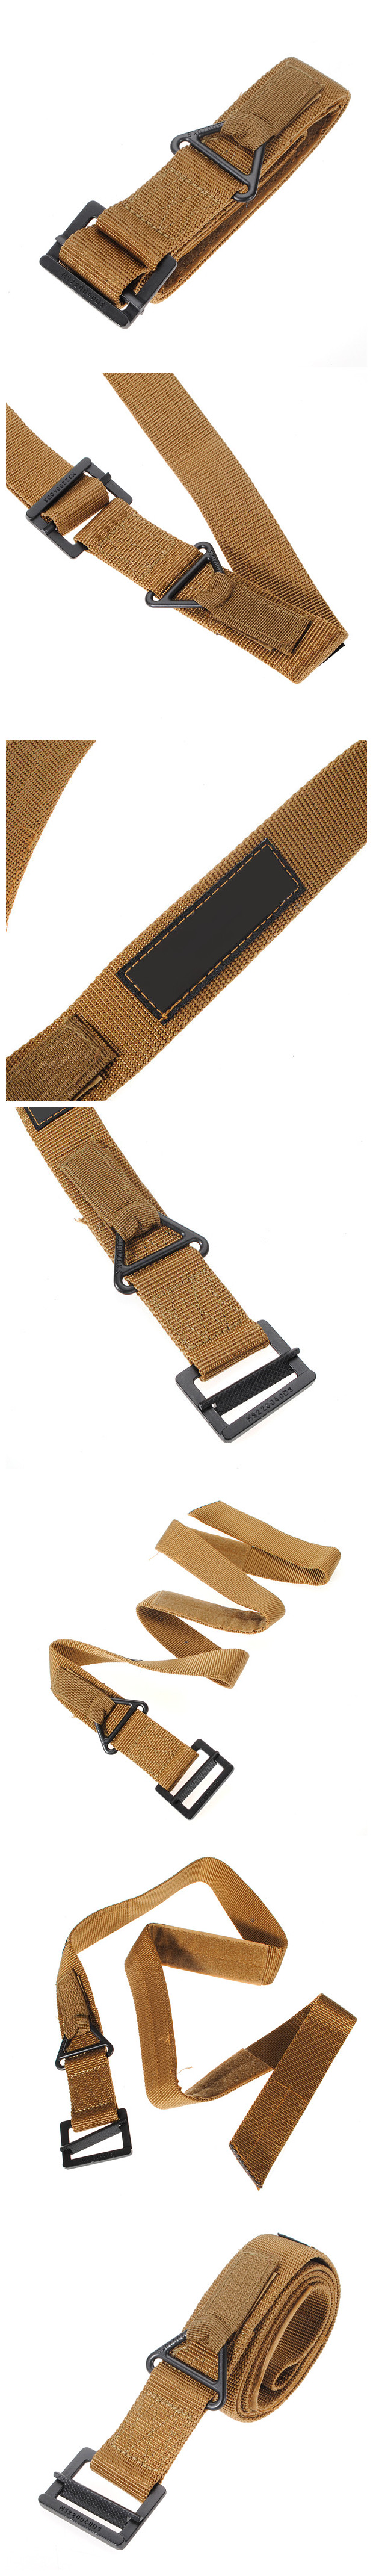 KALOAD-Survival-Tactical-Waist-Belt-Strap-Military-Emergency-Rescue-Protection-Waistband-For-Hunting-62888-3